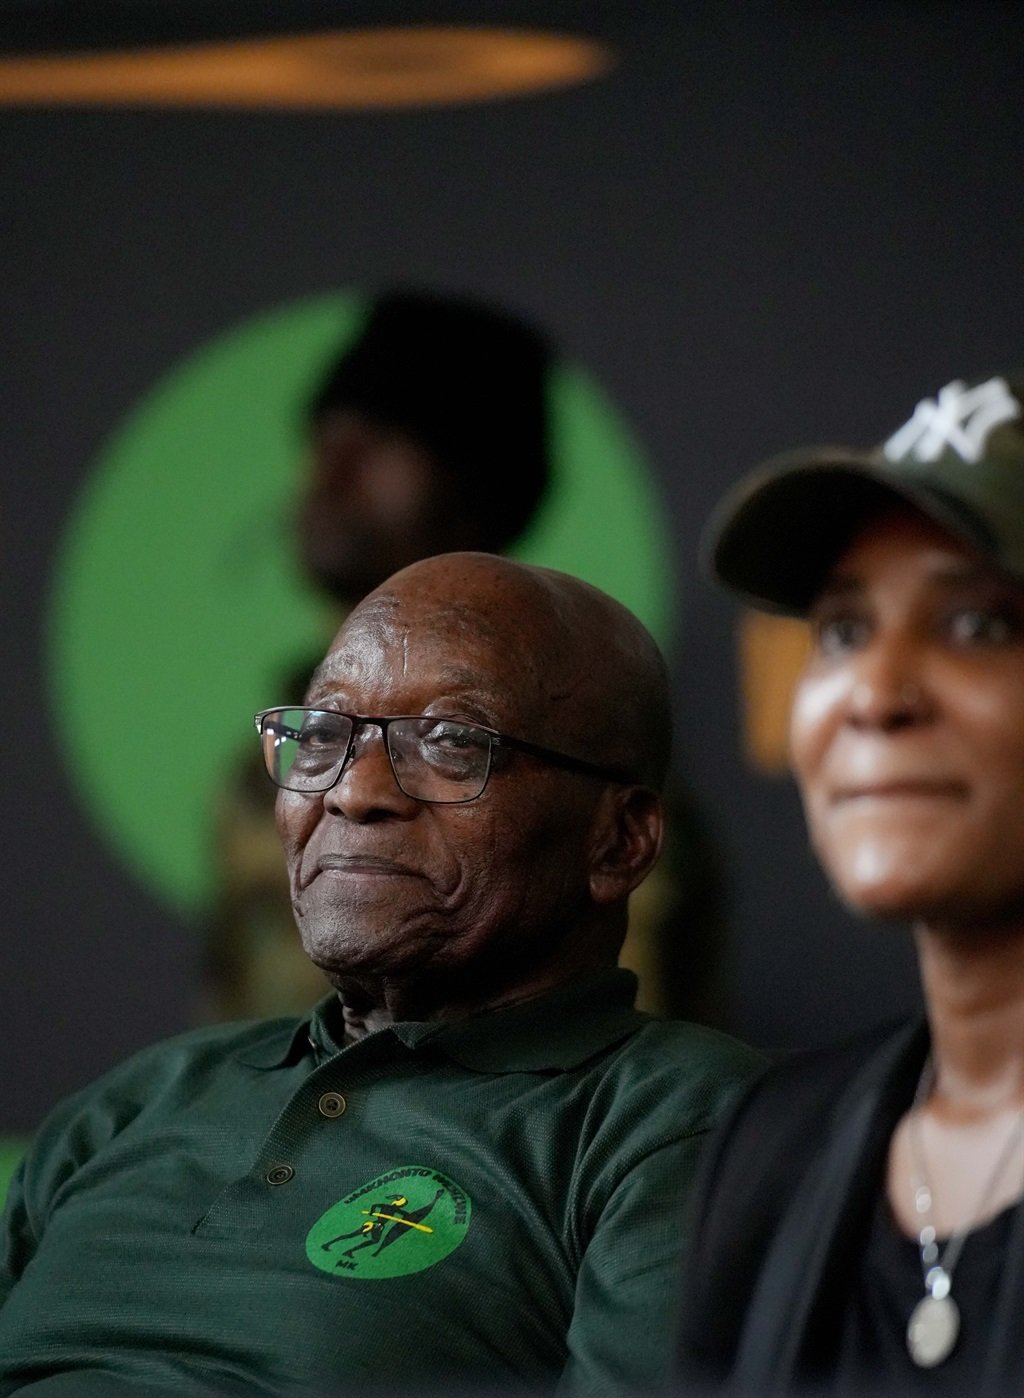 Founder of MKP Jabulani Khumalo alleged that former president Jacob Zuma committed several acts of misconduct, bringing the party into disrepute and causing confusion among the public and party members